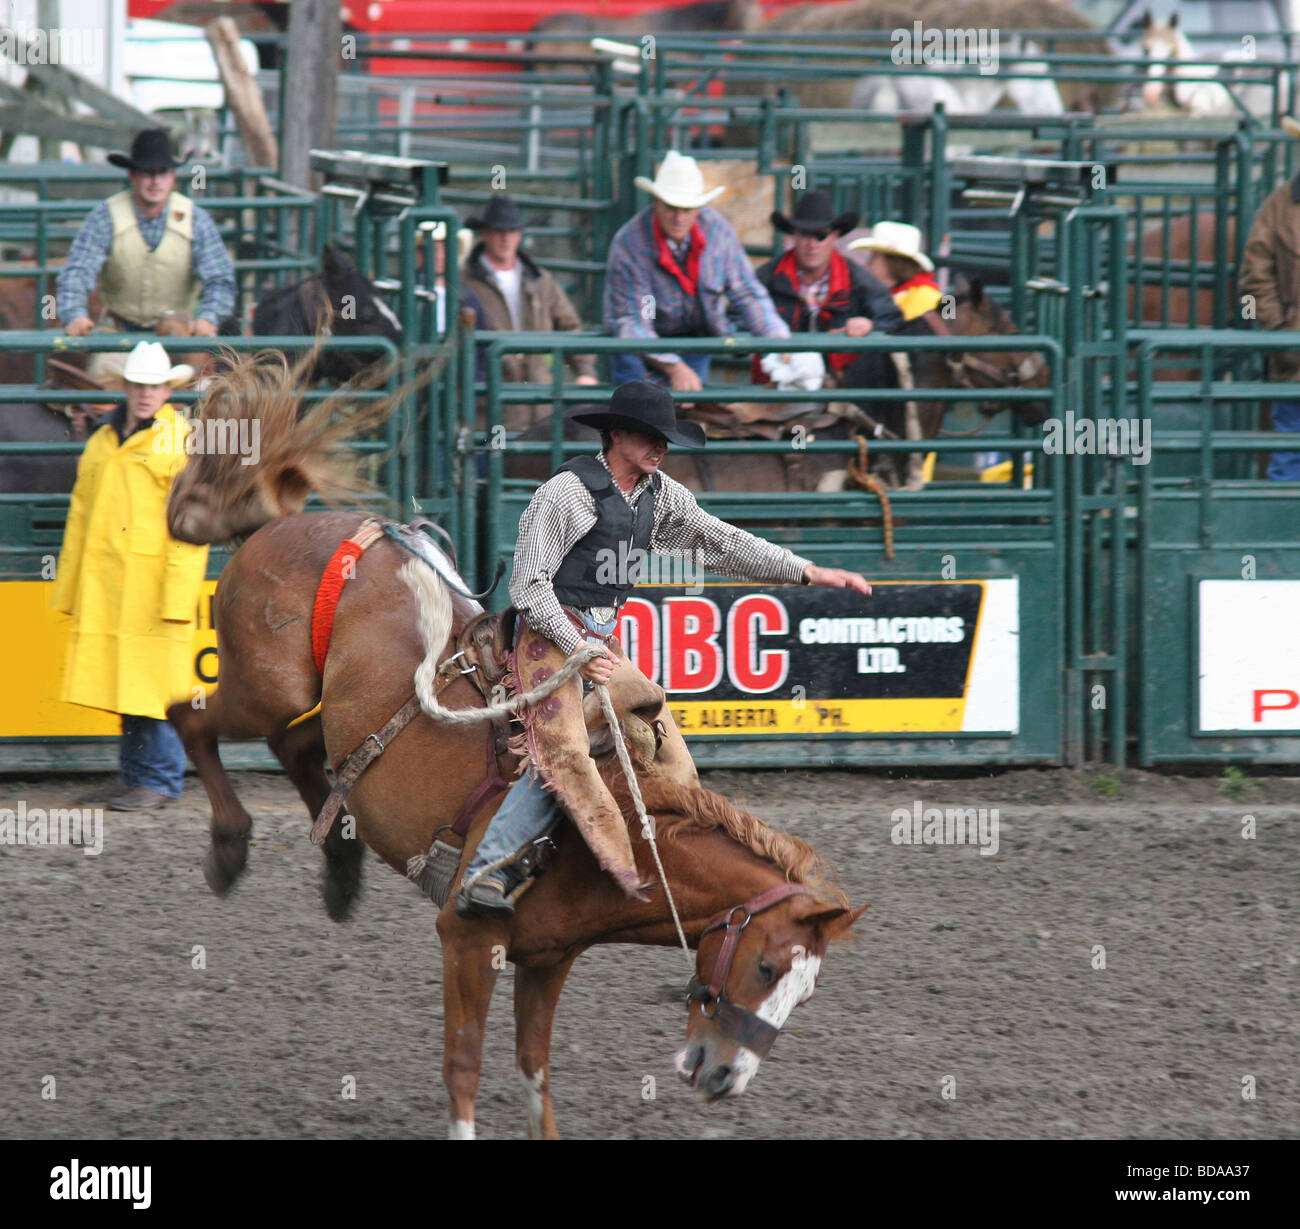 Cowboy on the Saddle Bronc at a Small Town Rodeo Stock Photo